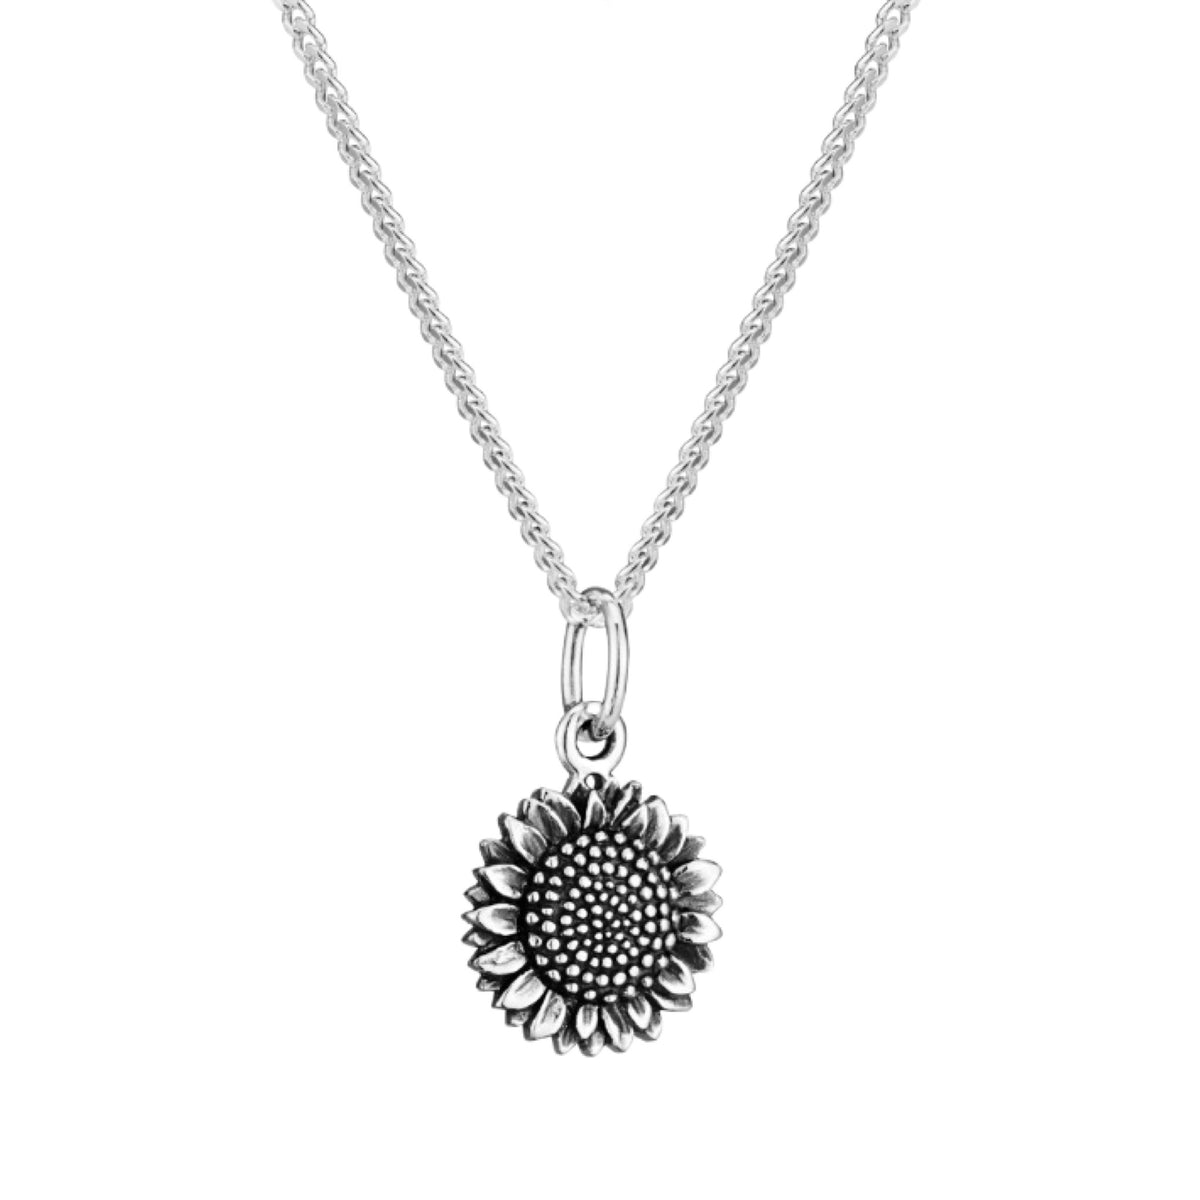 LITTLE SUNFLOWER - Sterling Silver Necklace